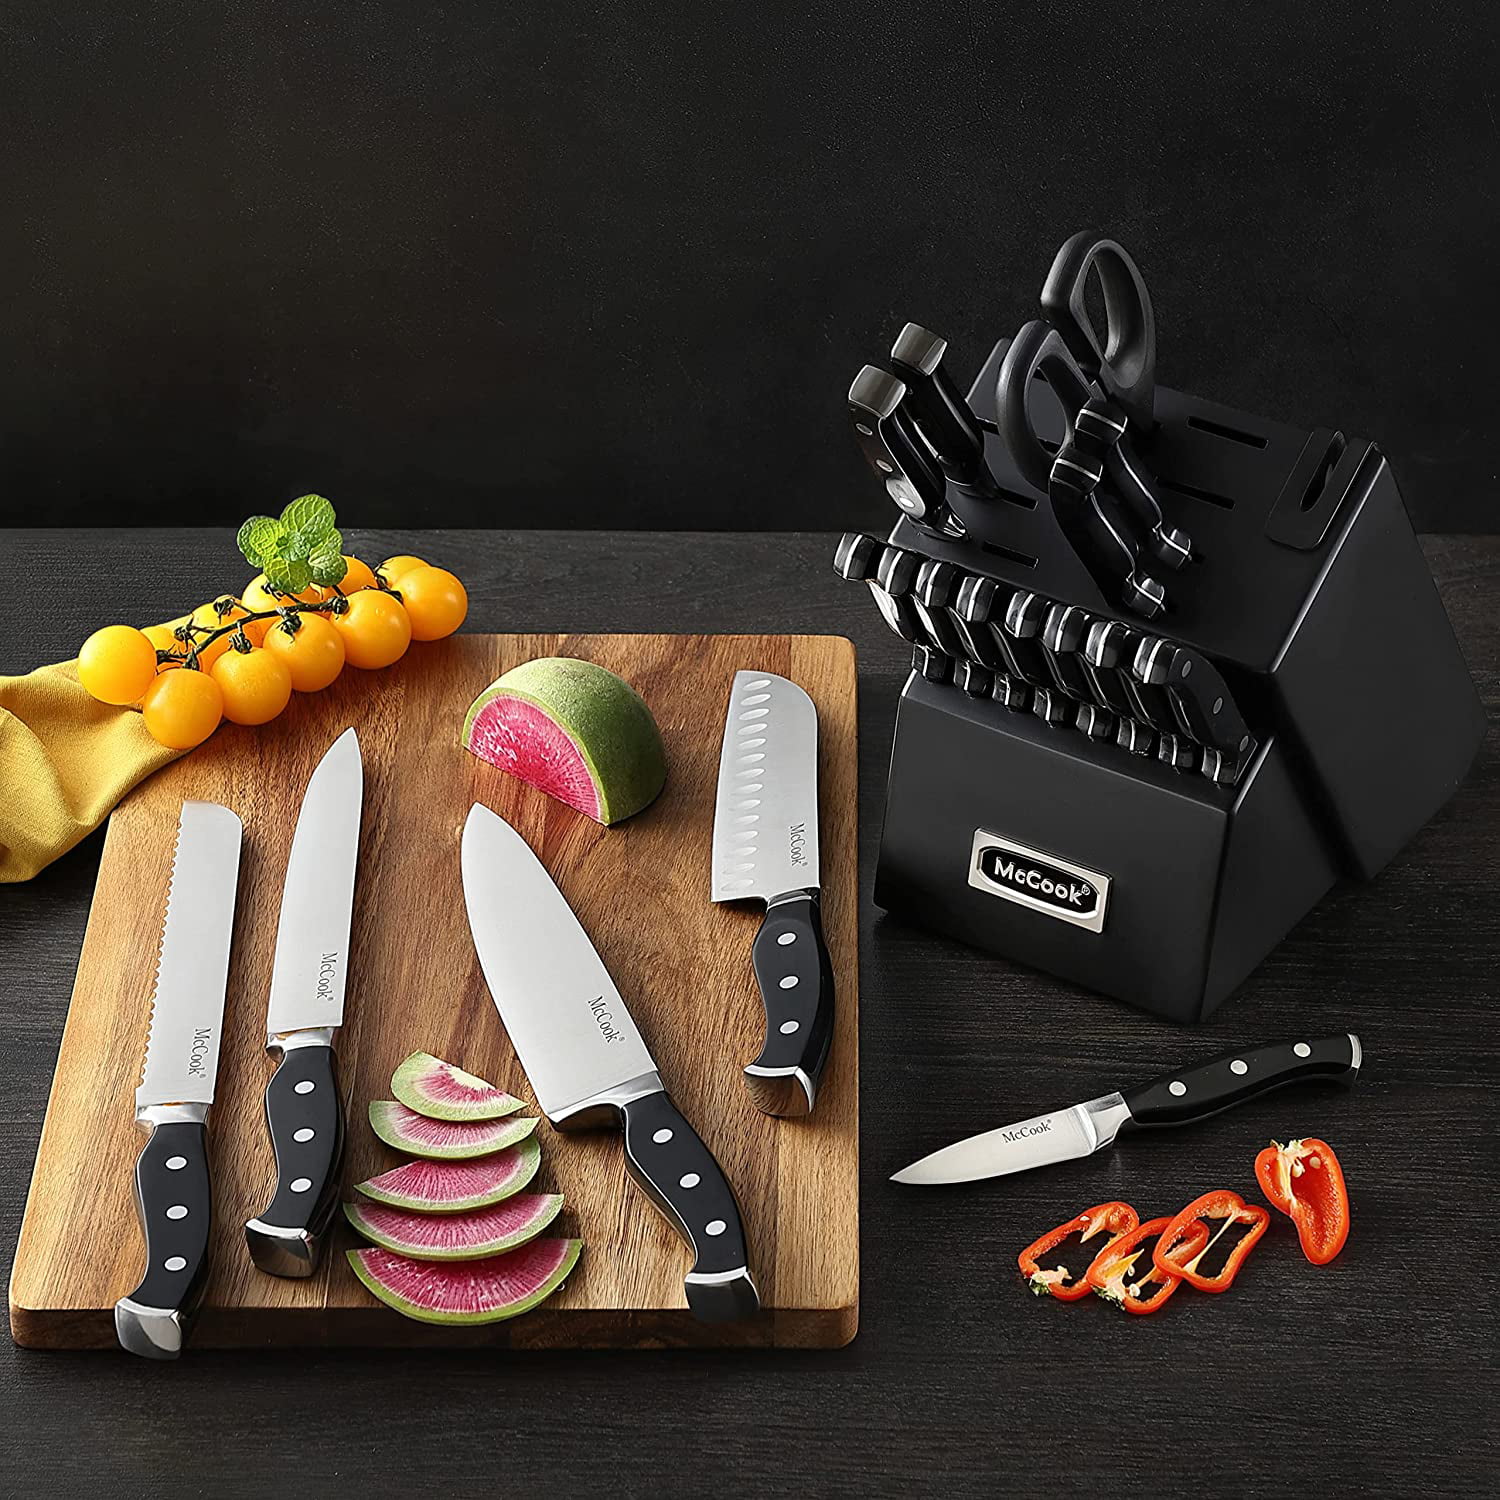 Knife Sets,McCook Mc65g 20 Piece German Stainless Steel Forged Kitchen Knife Block Set, Cutlery Set with Gray Block, Black